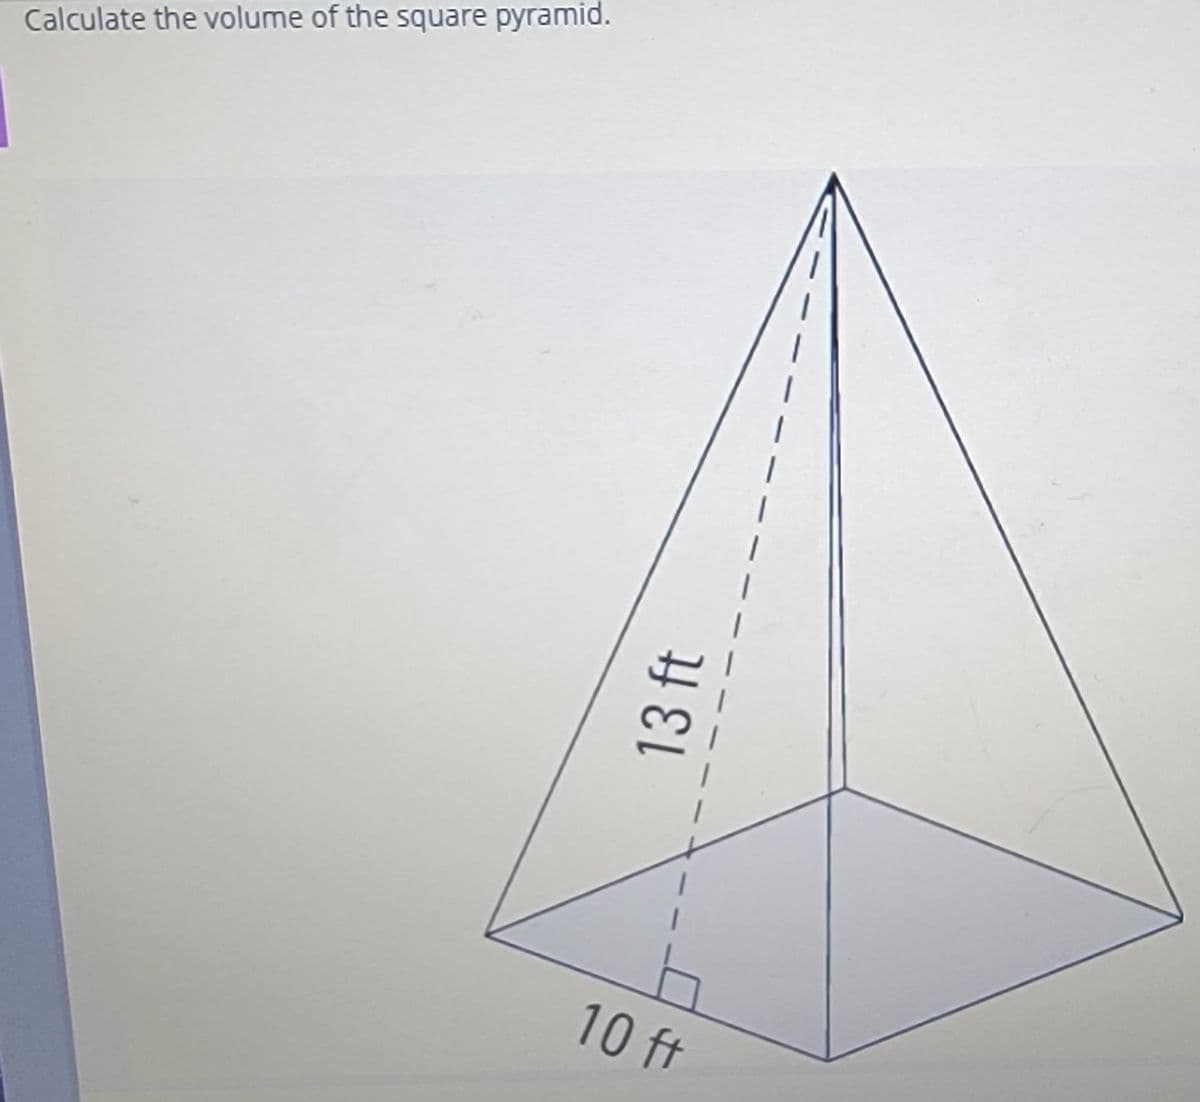 Calculate the volume of the square pyramid.
10 ft
13 ft
